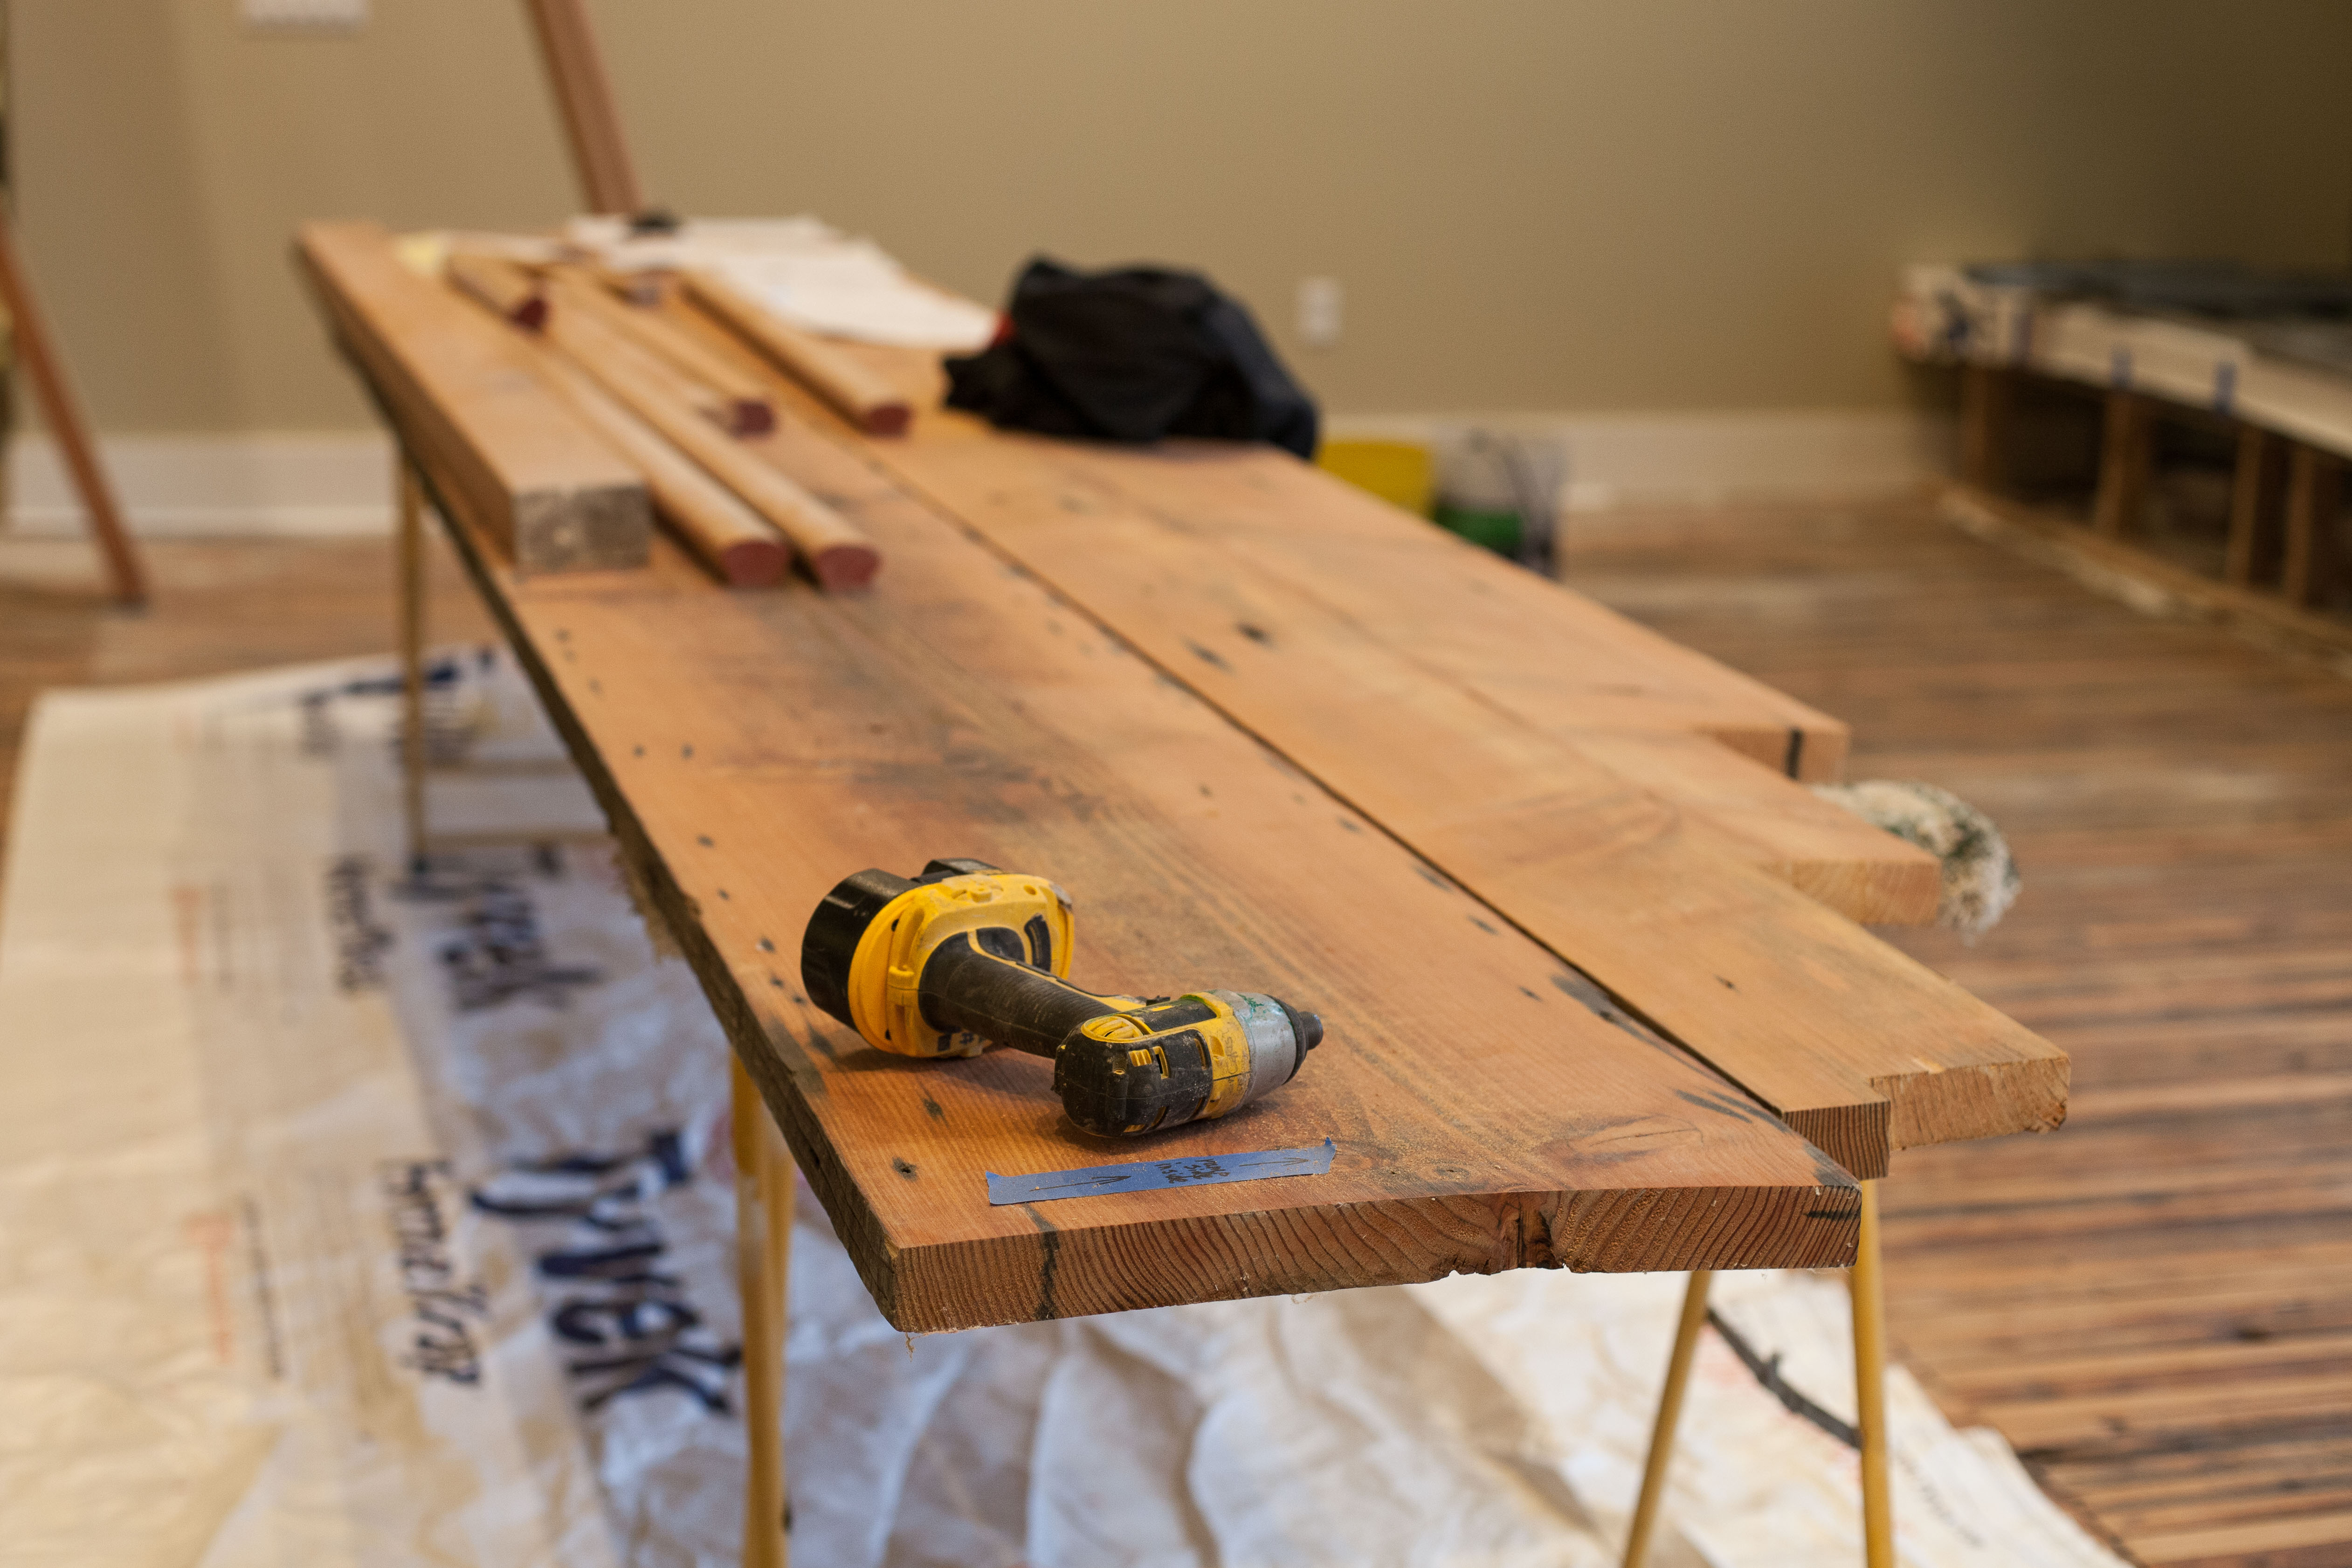 A power tool lays momentarily idle on a reclaimed wood piece awaiting installation.